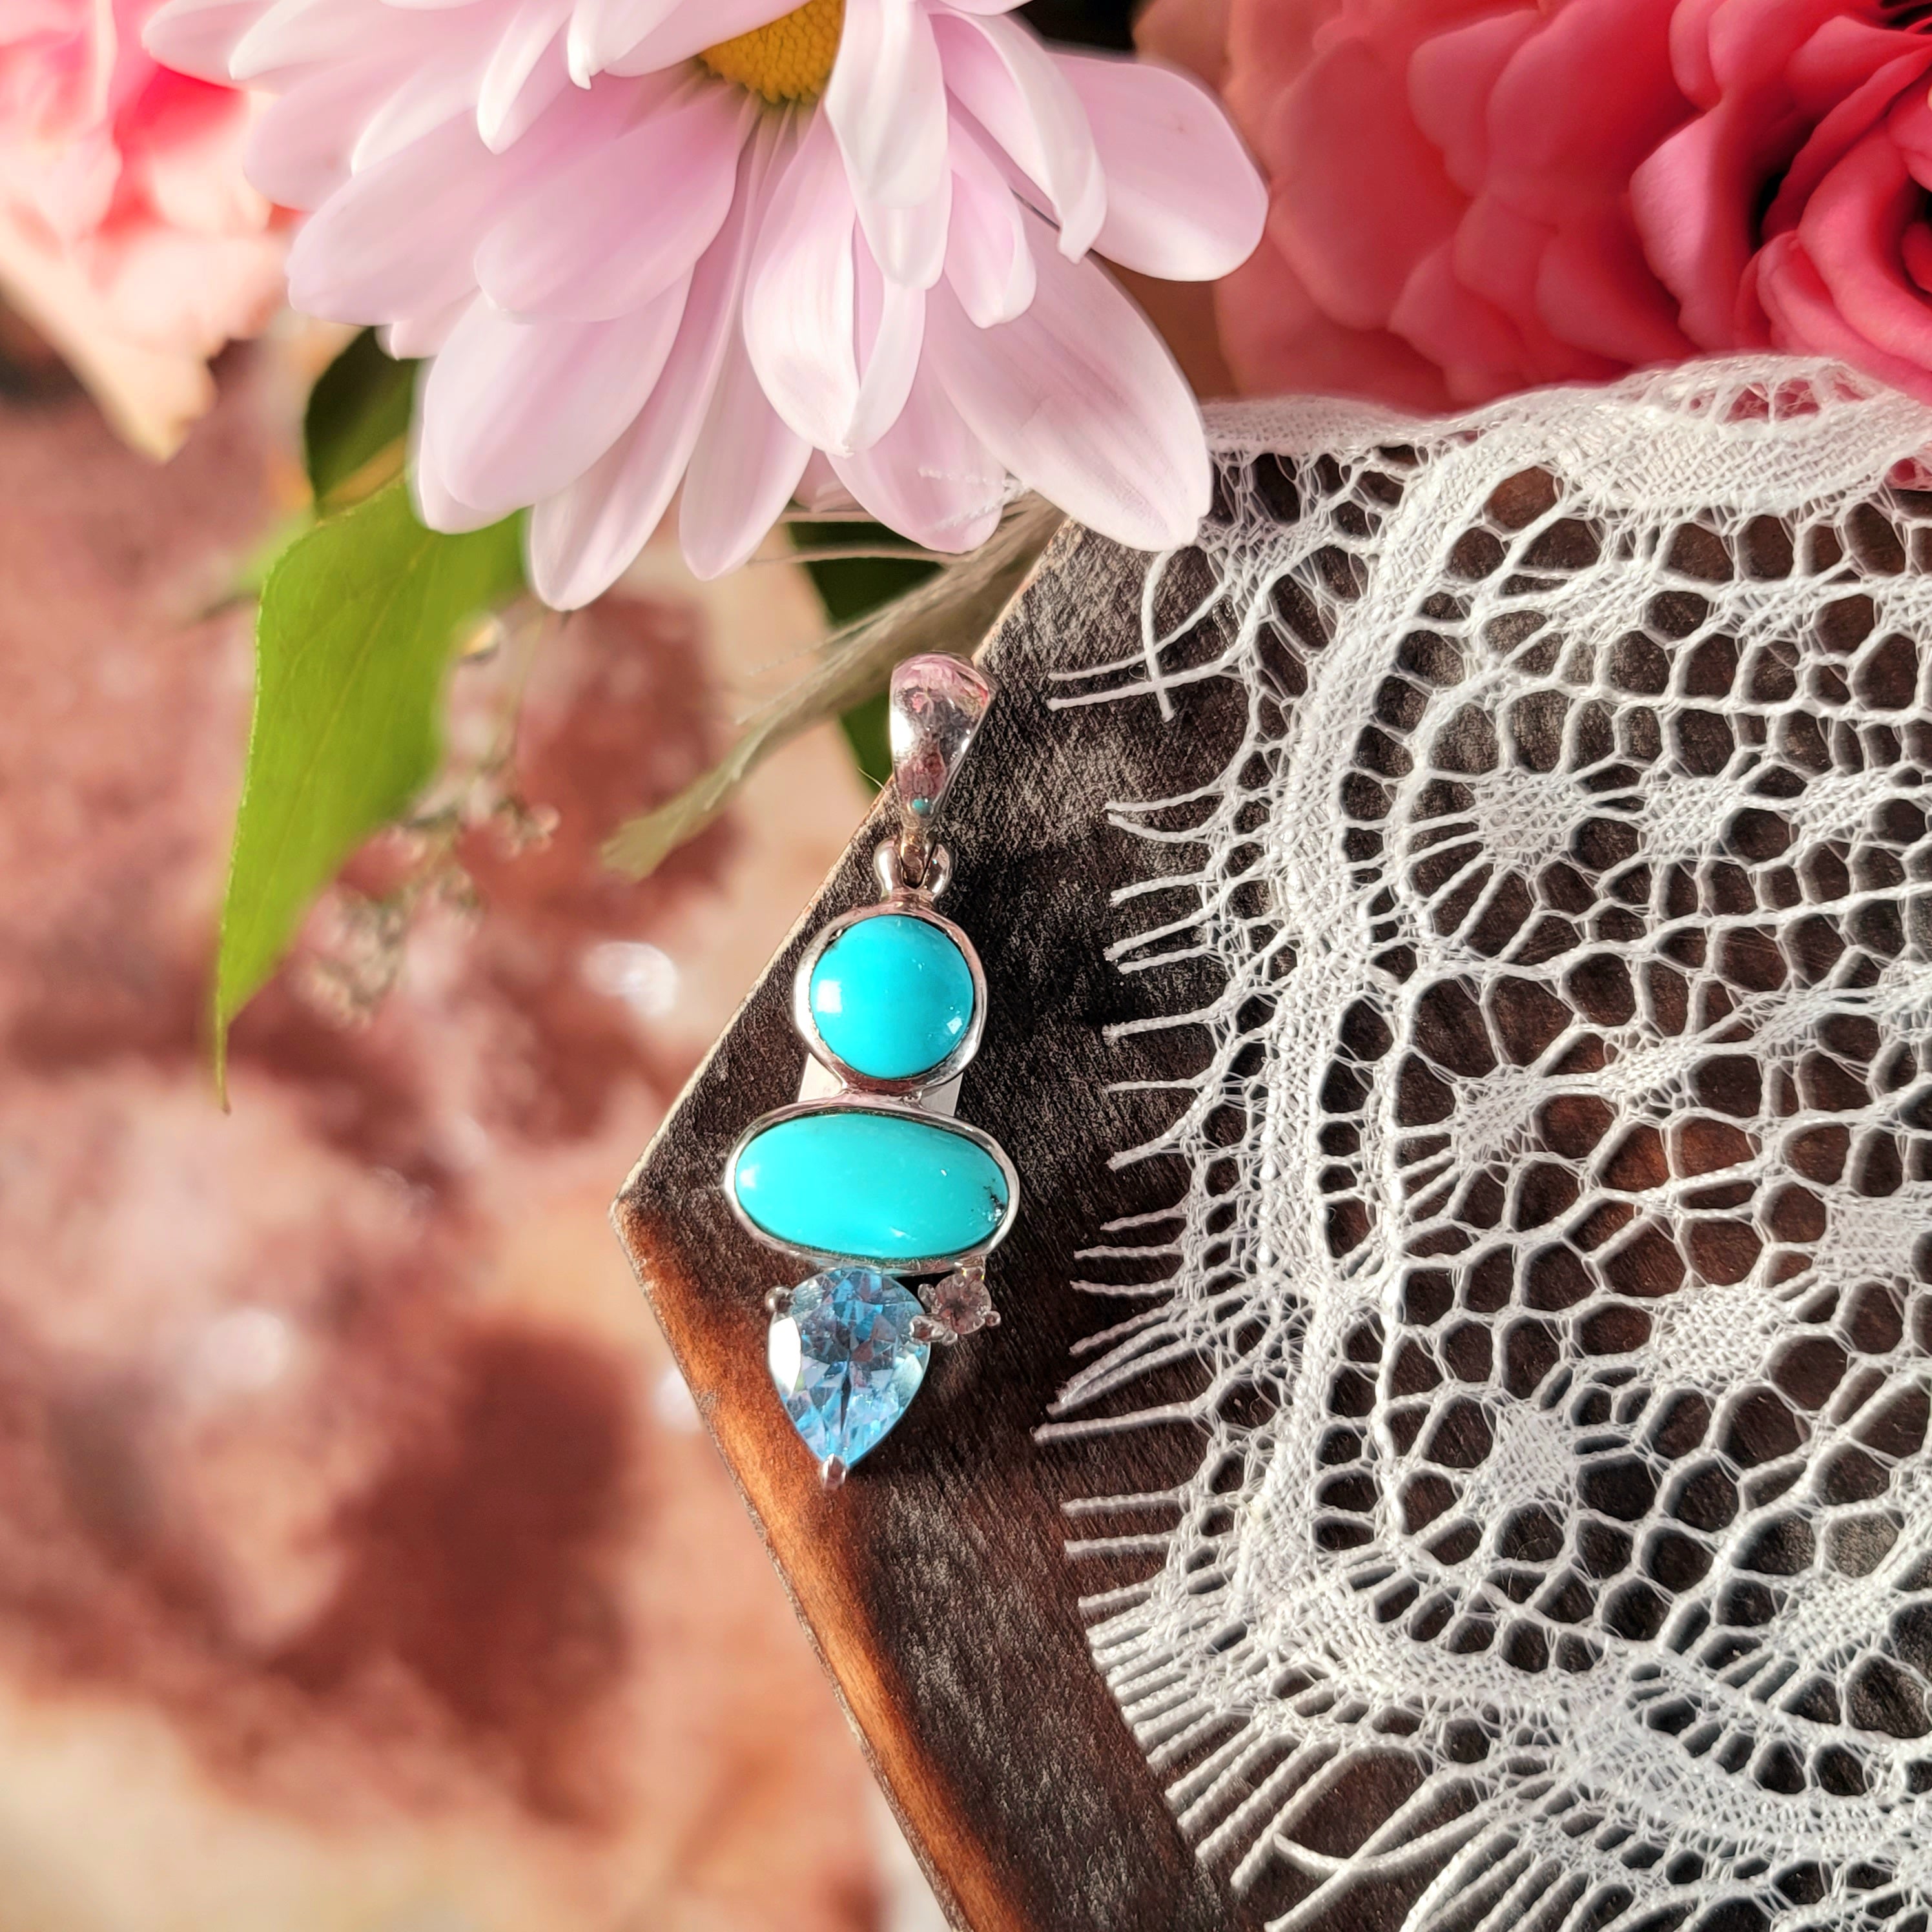 Turquoise x Blue Topaz Pendant for Good Luck, Love, Prosperity and Protection